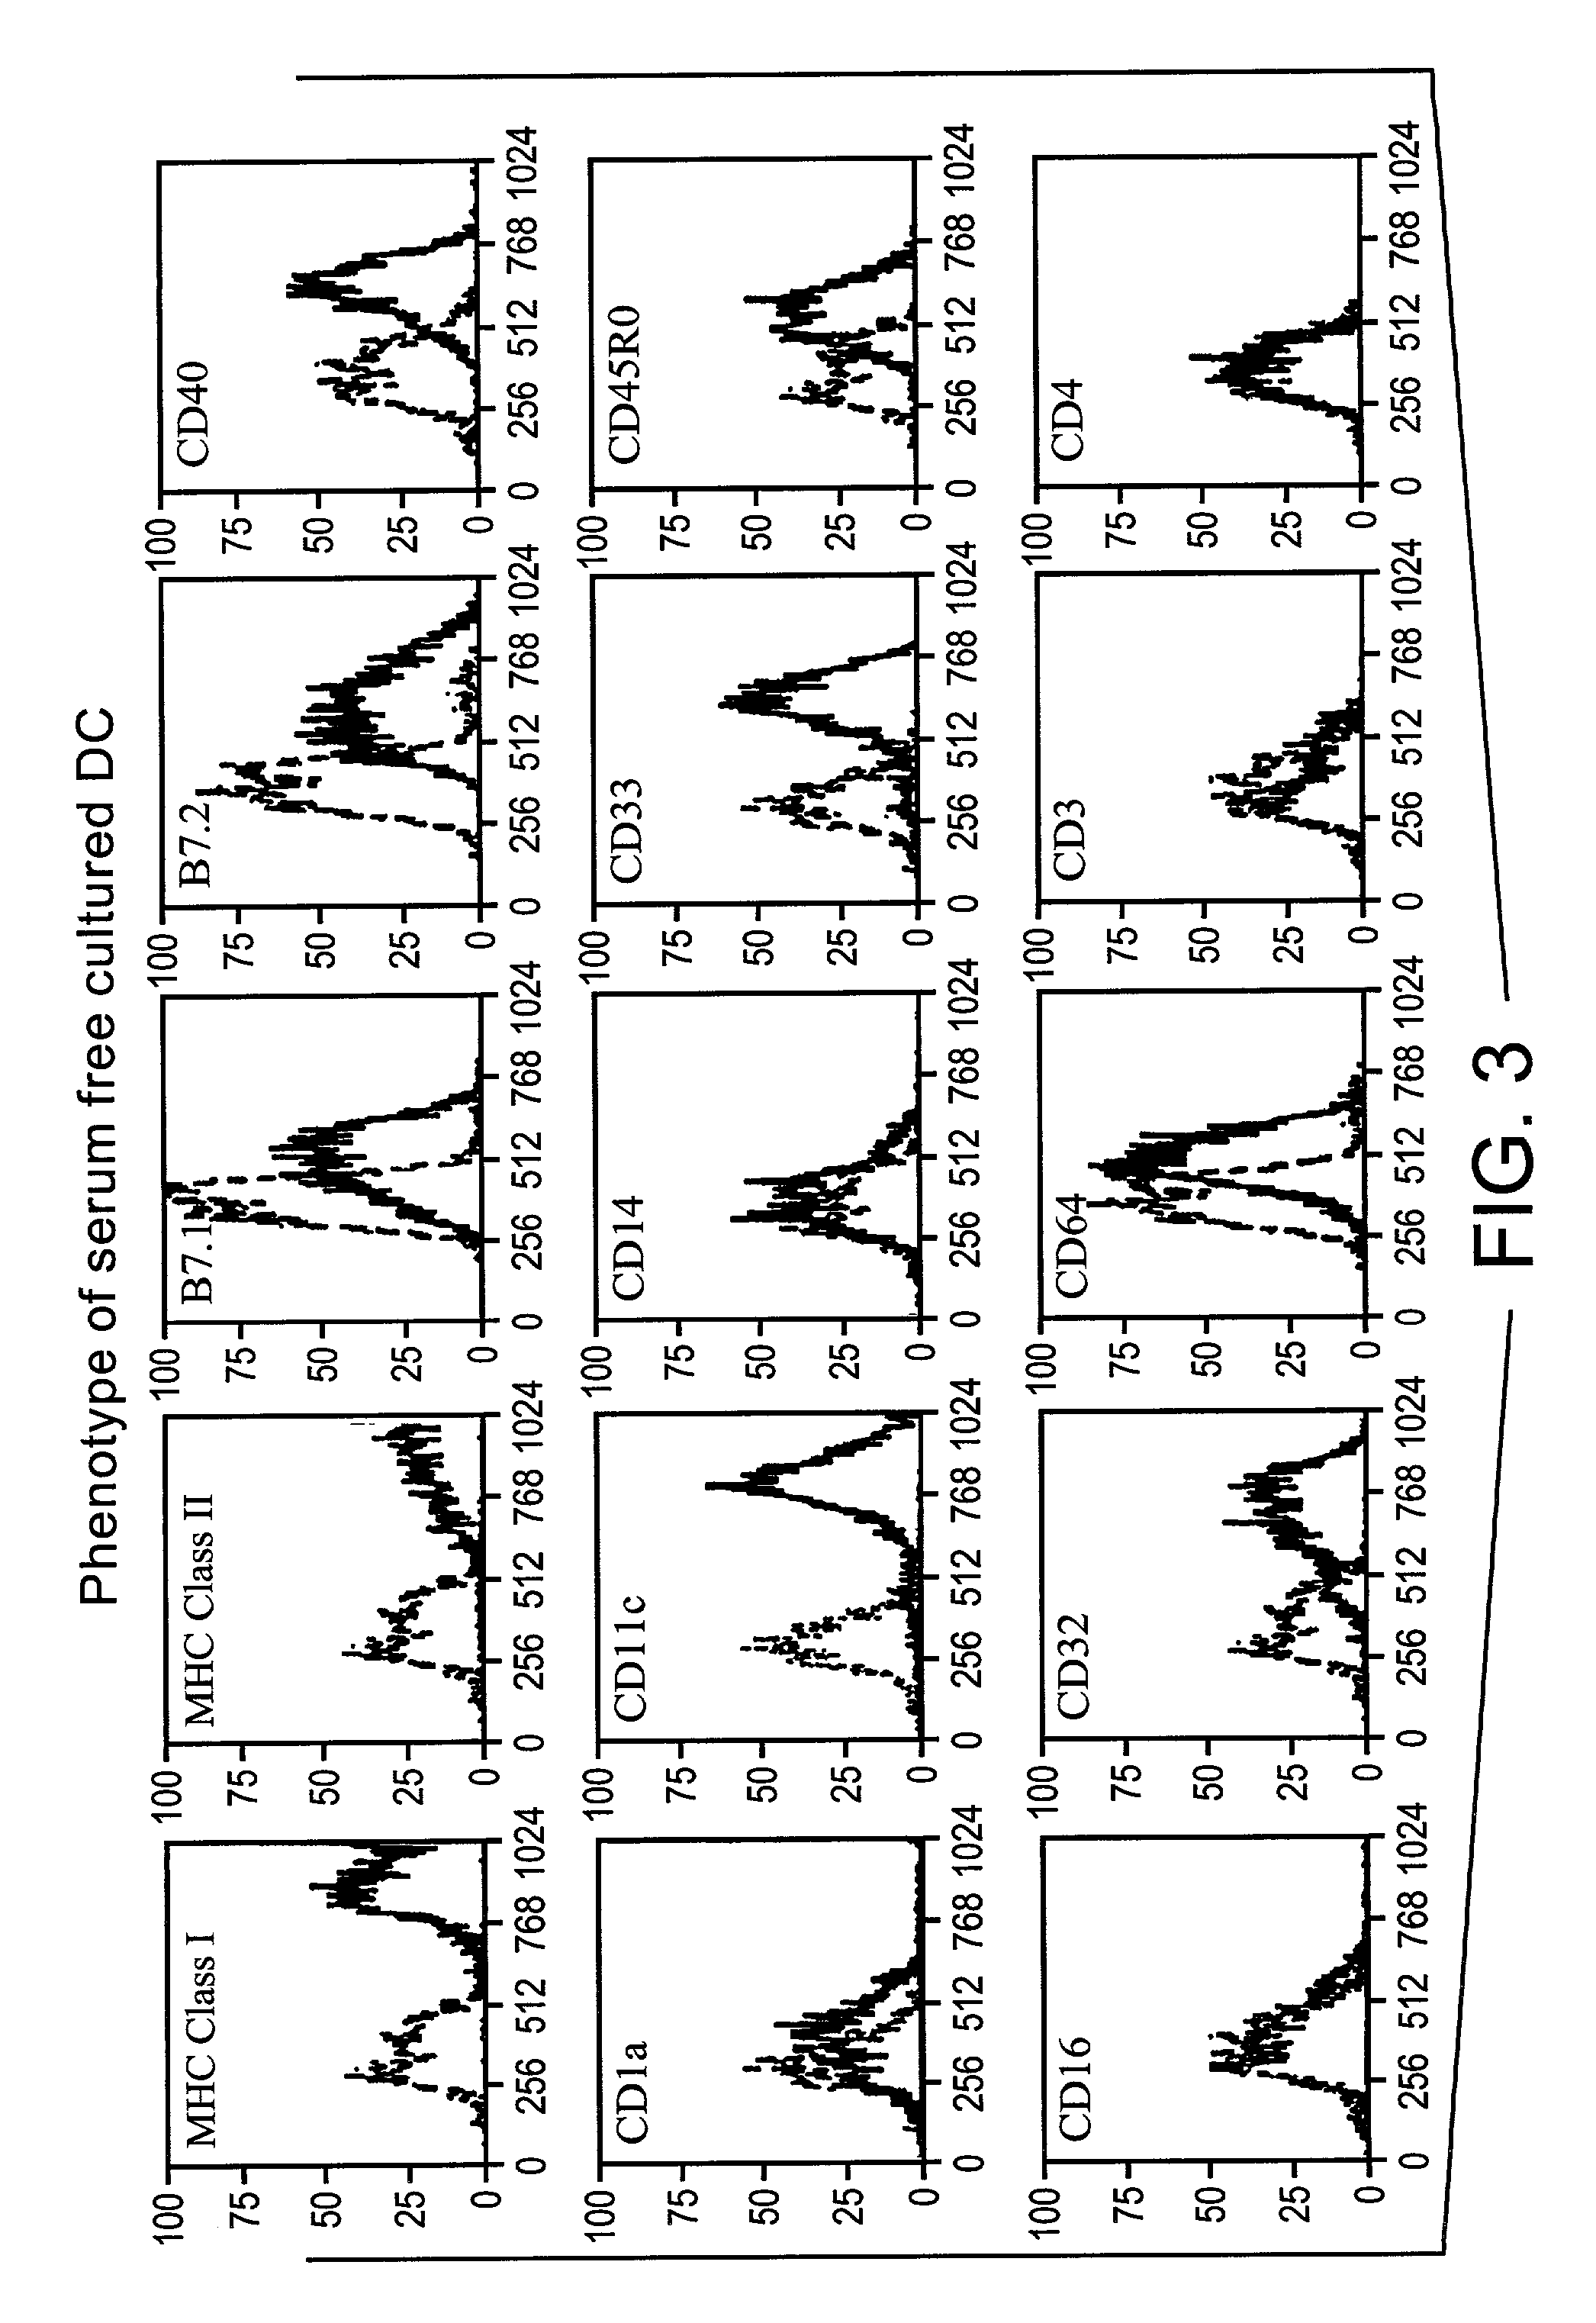 Method for producing human antibodies in SCID mice which uses dendritic cells pulsed with antigen-antibody complexes and antigen-antibody complexes as immunizing agents